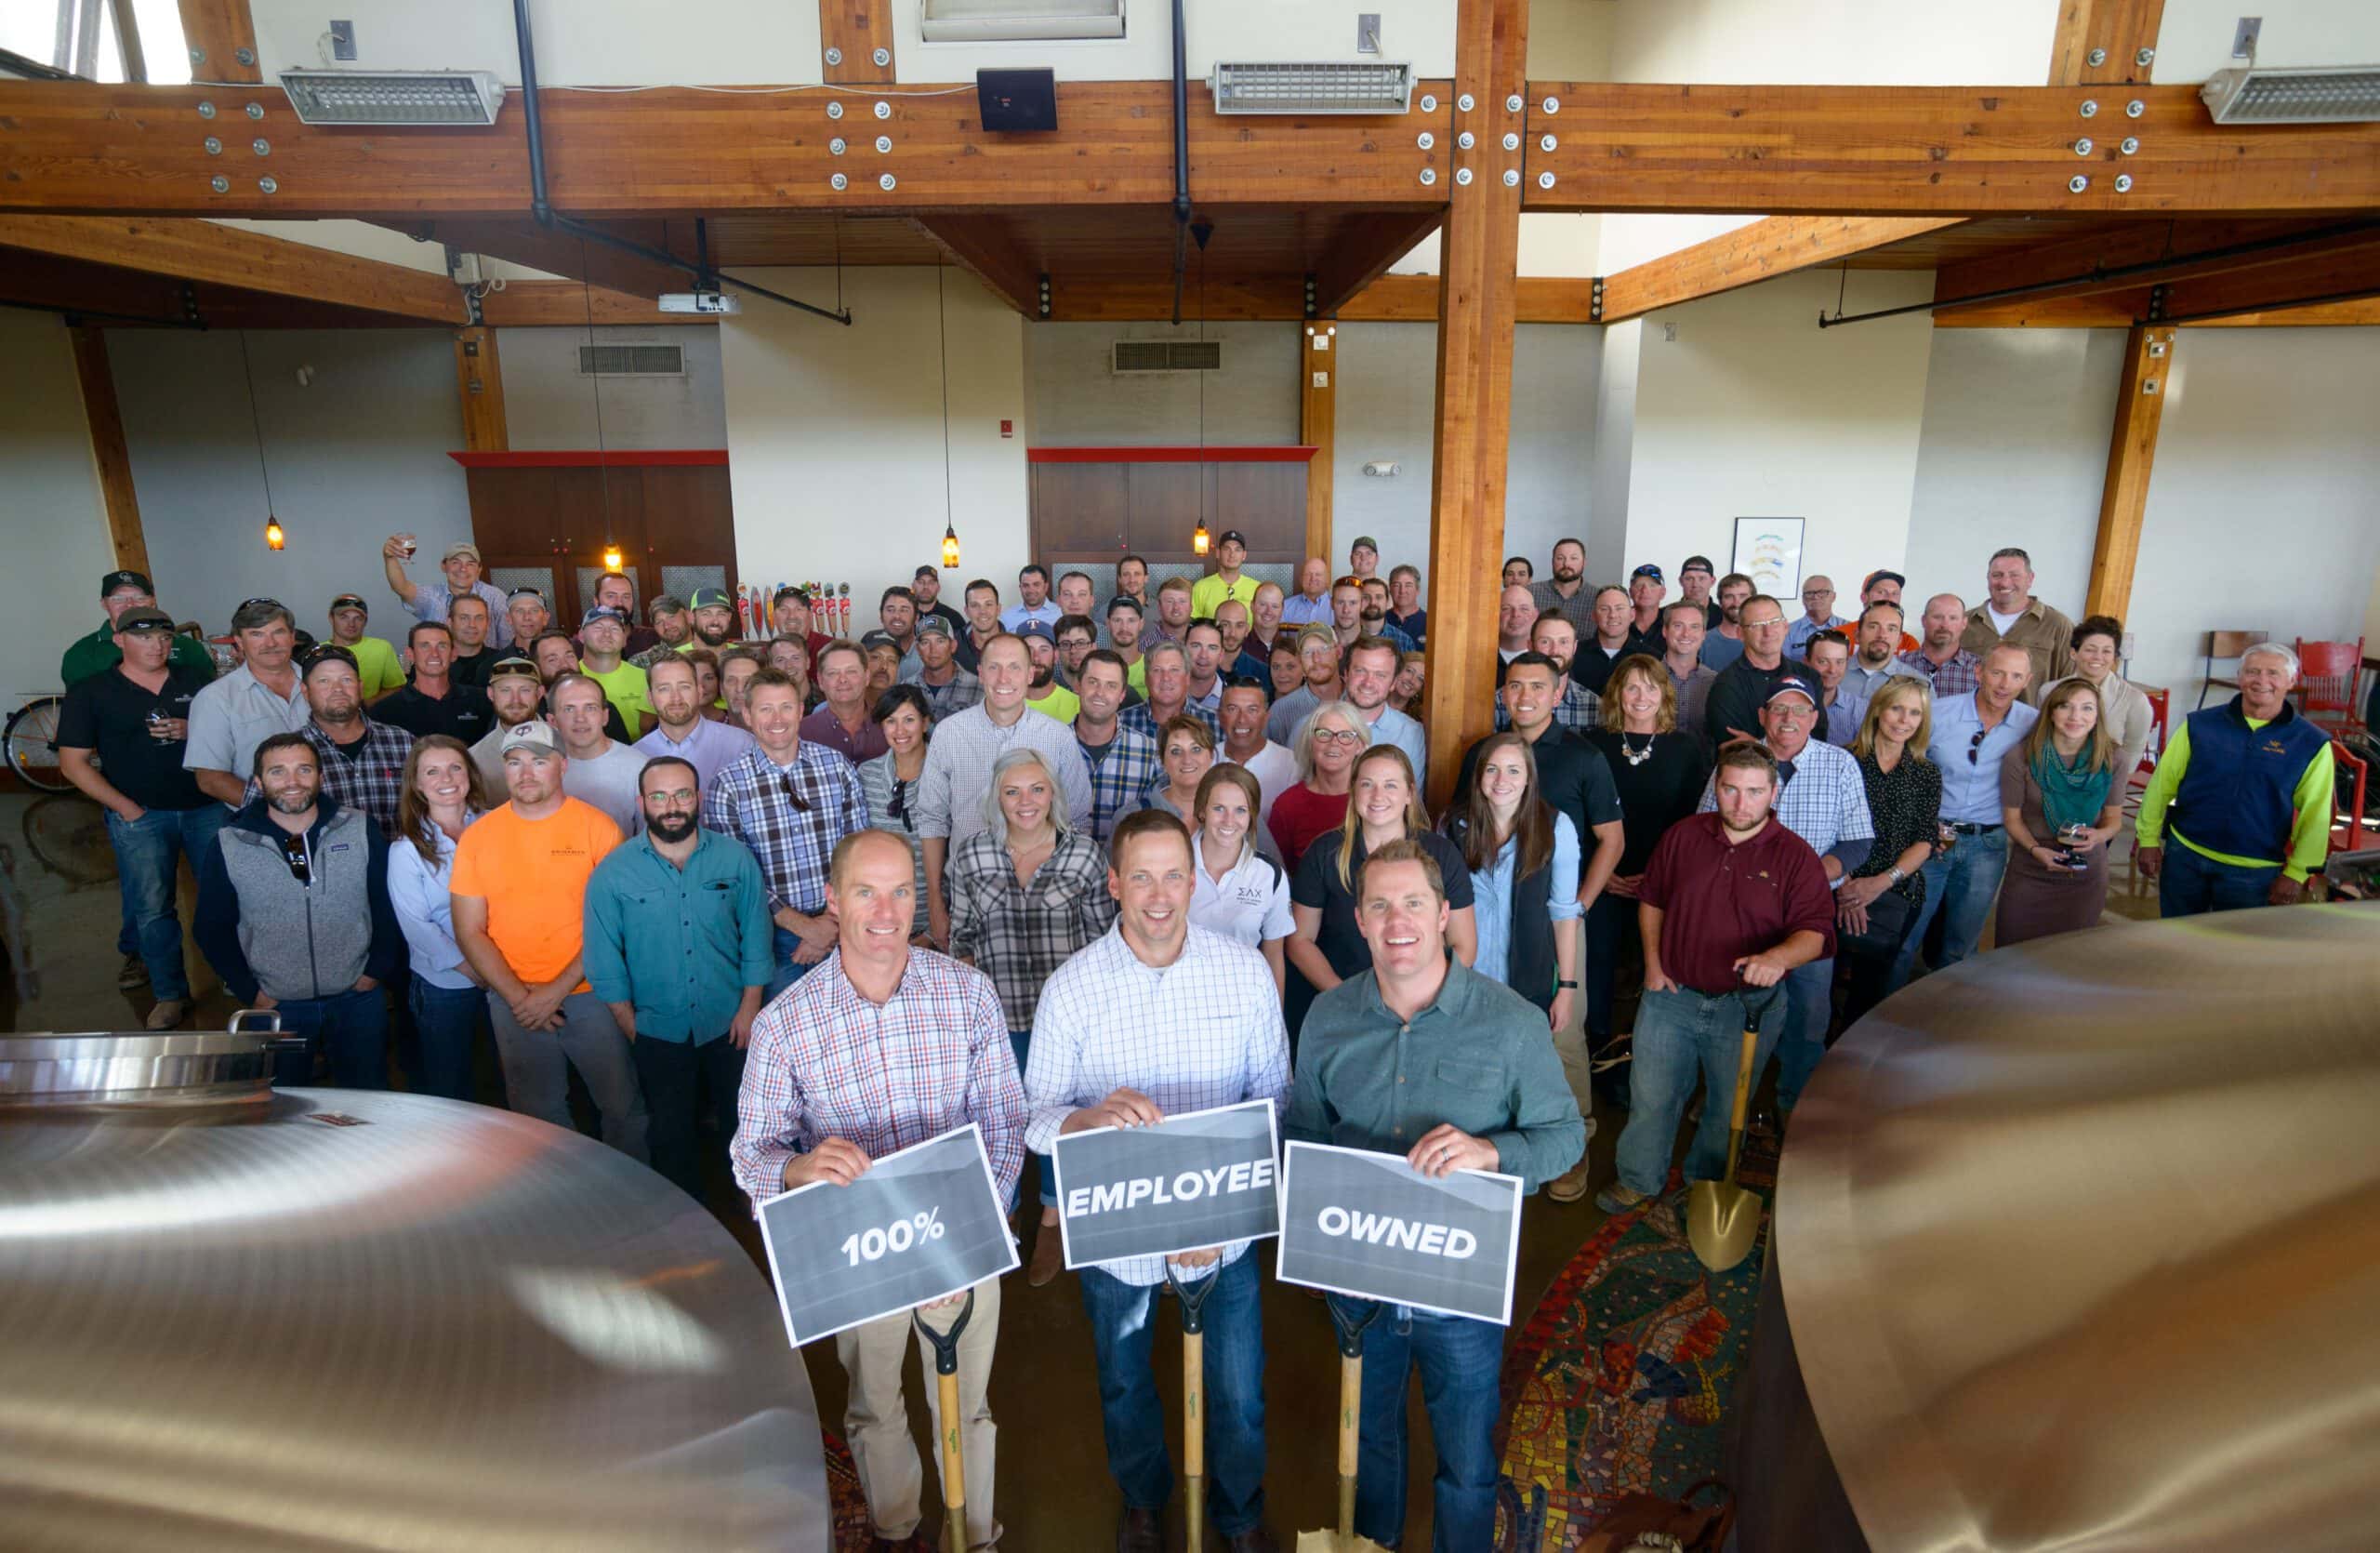 Brinkman Construction | 100% Employee Owned Construction Company | Employee Ownership Month